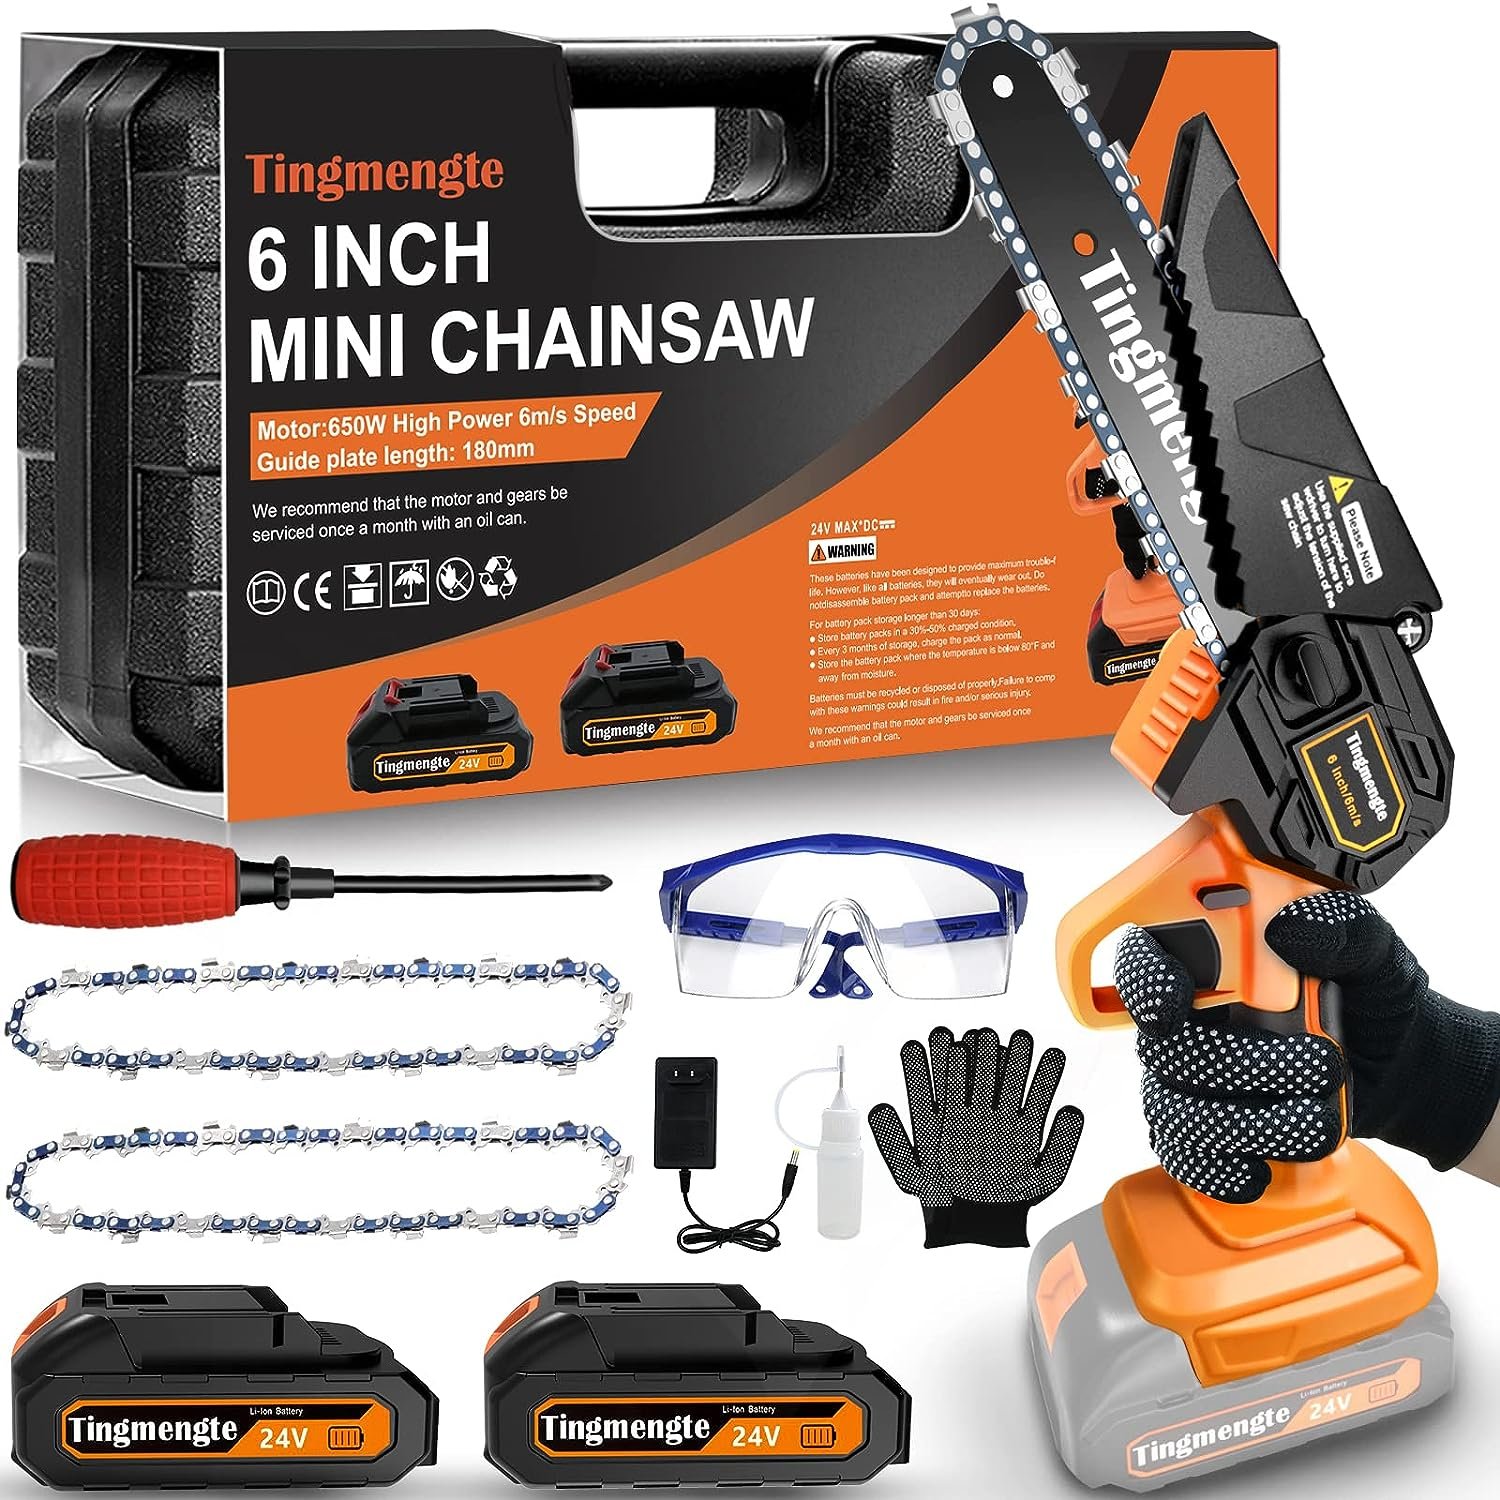 Mini Chainsaw 6 Inch Review